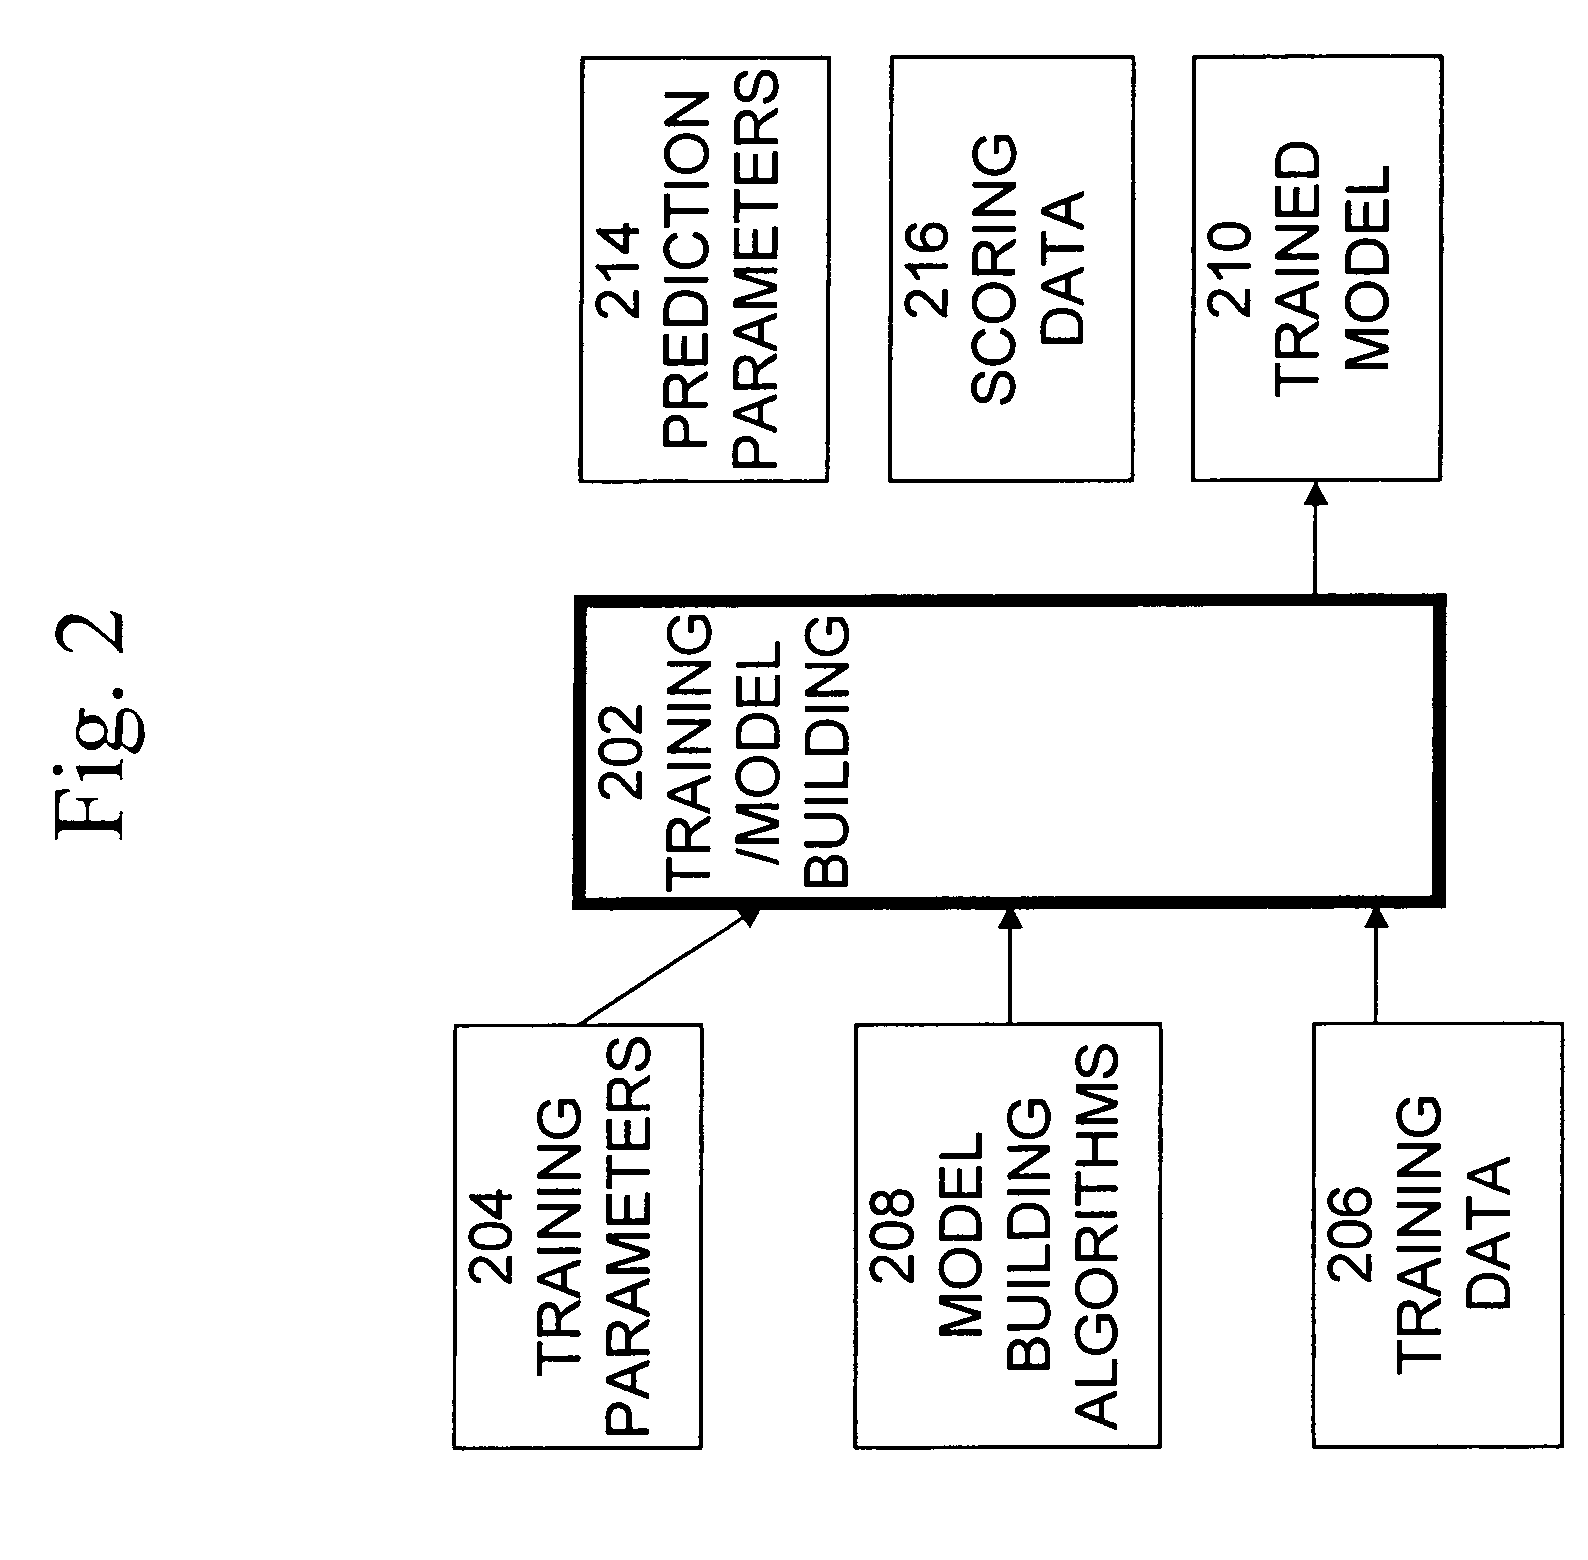 System and method for building decision trees in a database